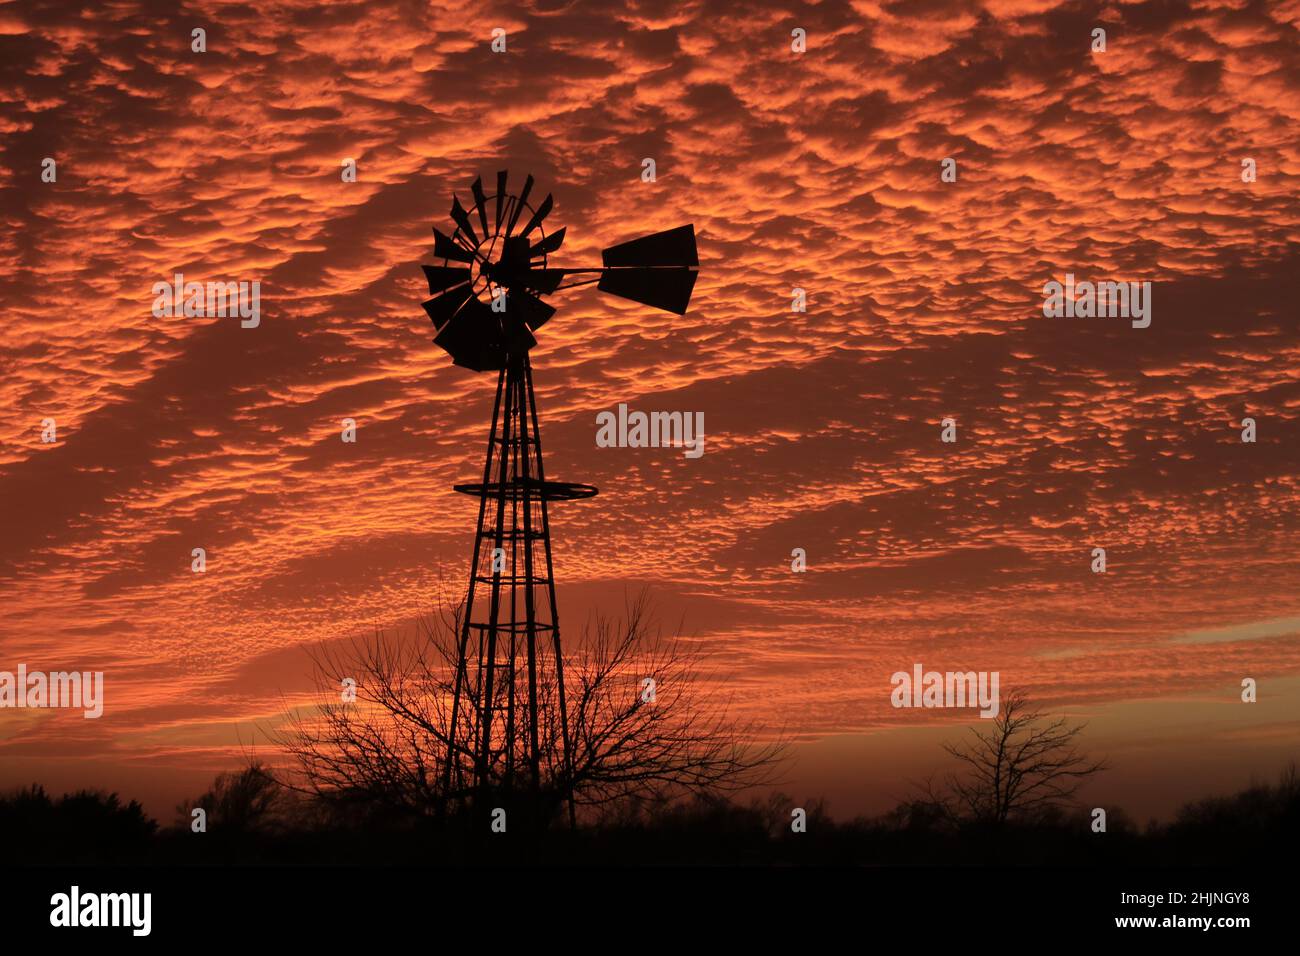 A Kansas colorful Red sky at Sunset with a Windmill silhouette out in the country in a pasture Stock Photo